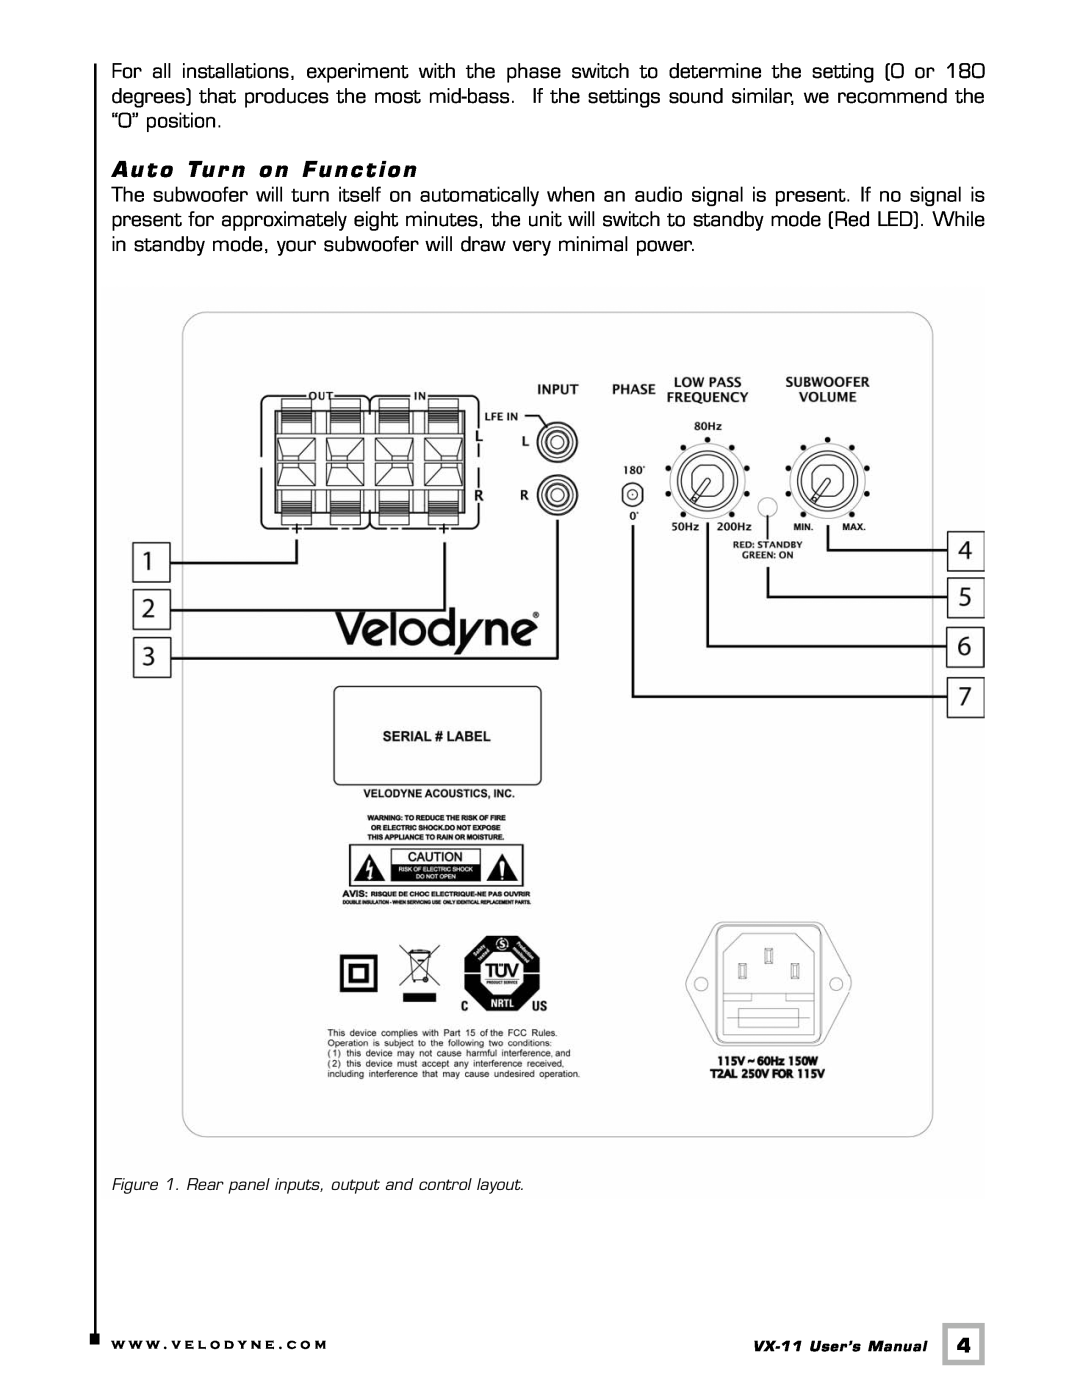 Velodyne Acoustics VX-11 user manual Auto Tur n on Function, Rear panel inputs, output and control layout 